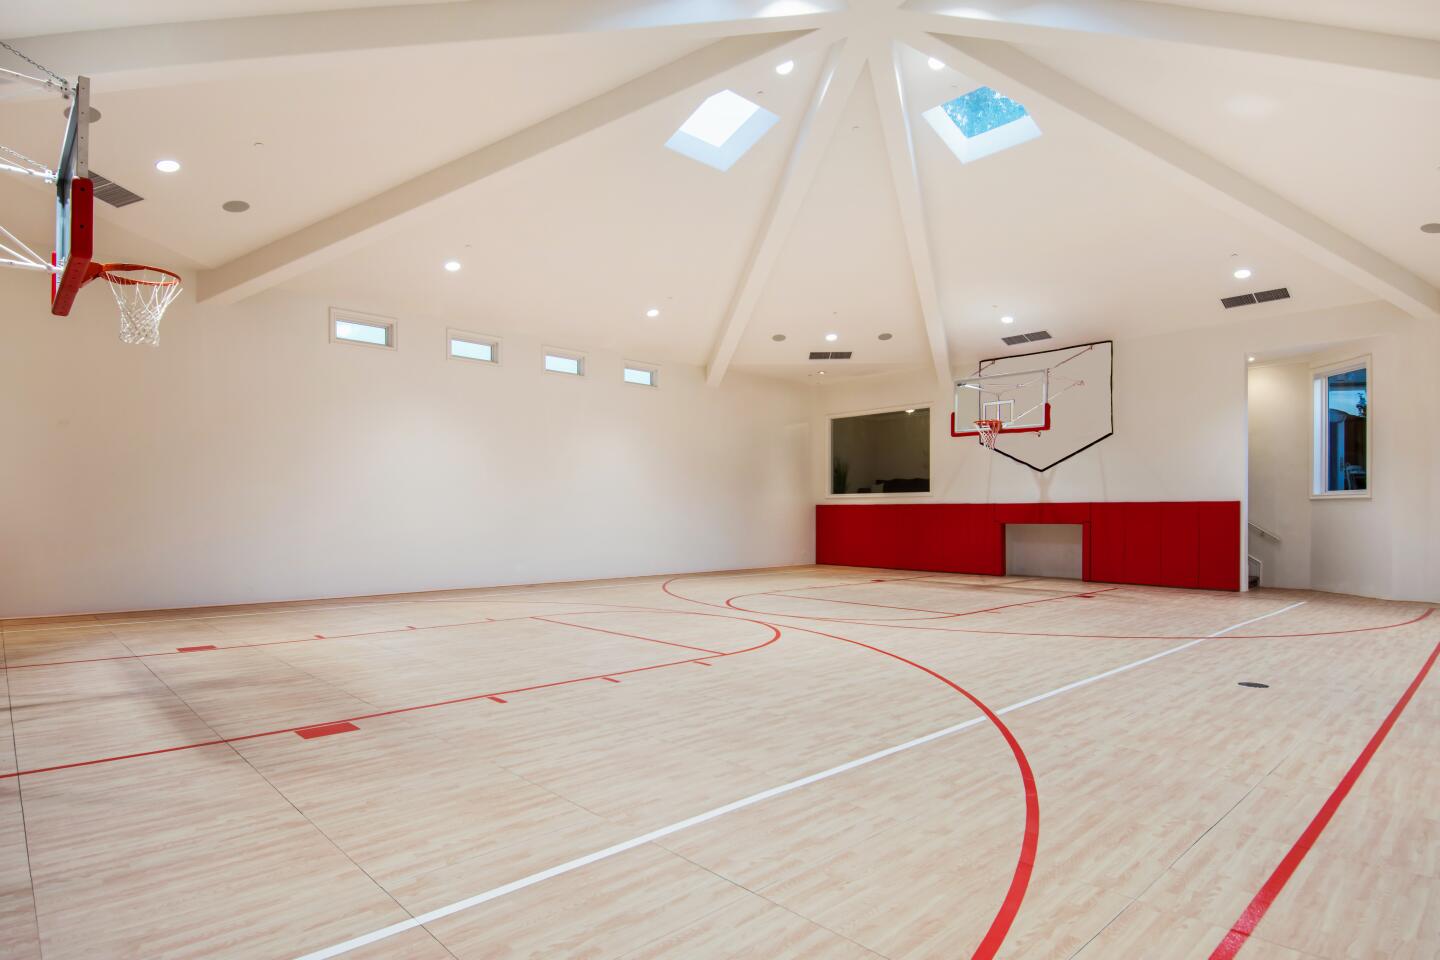 The basketball gymnasium has two hoops and a viewing box.